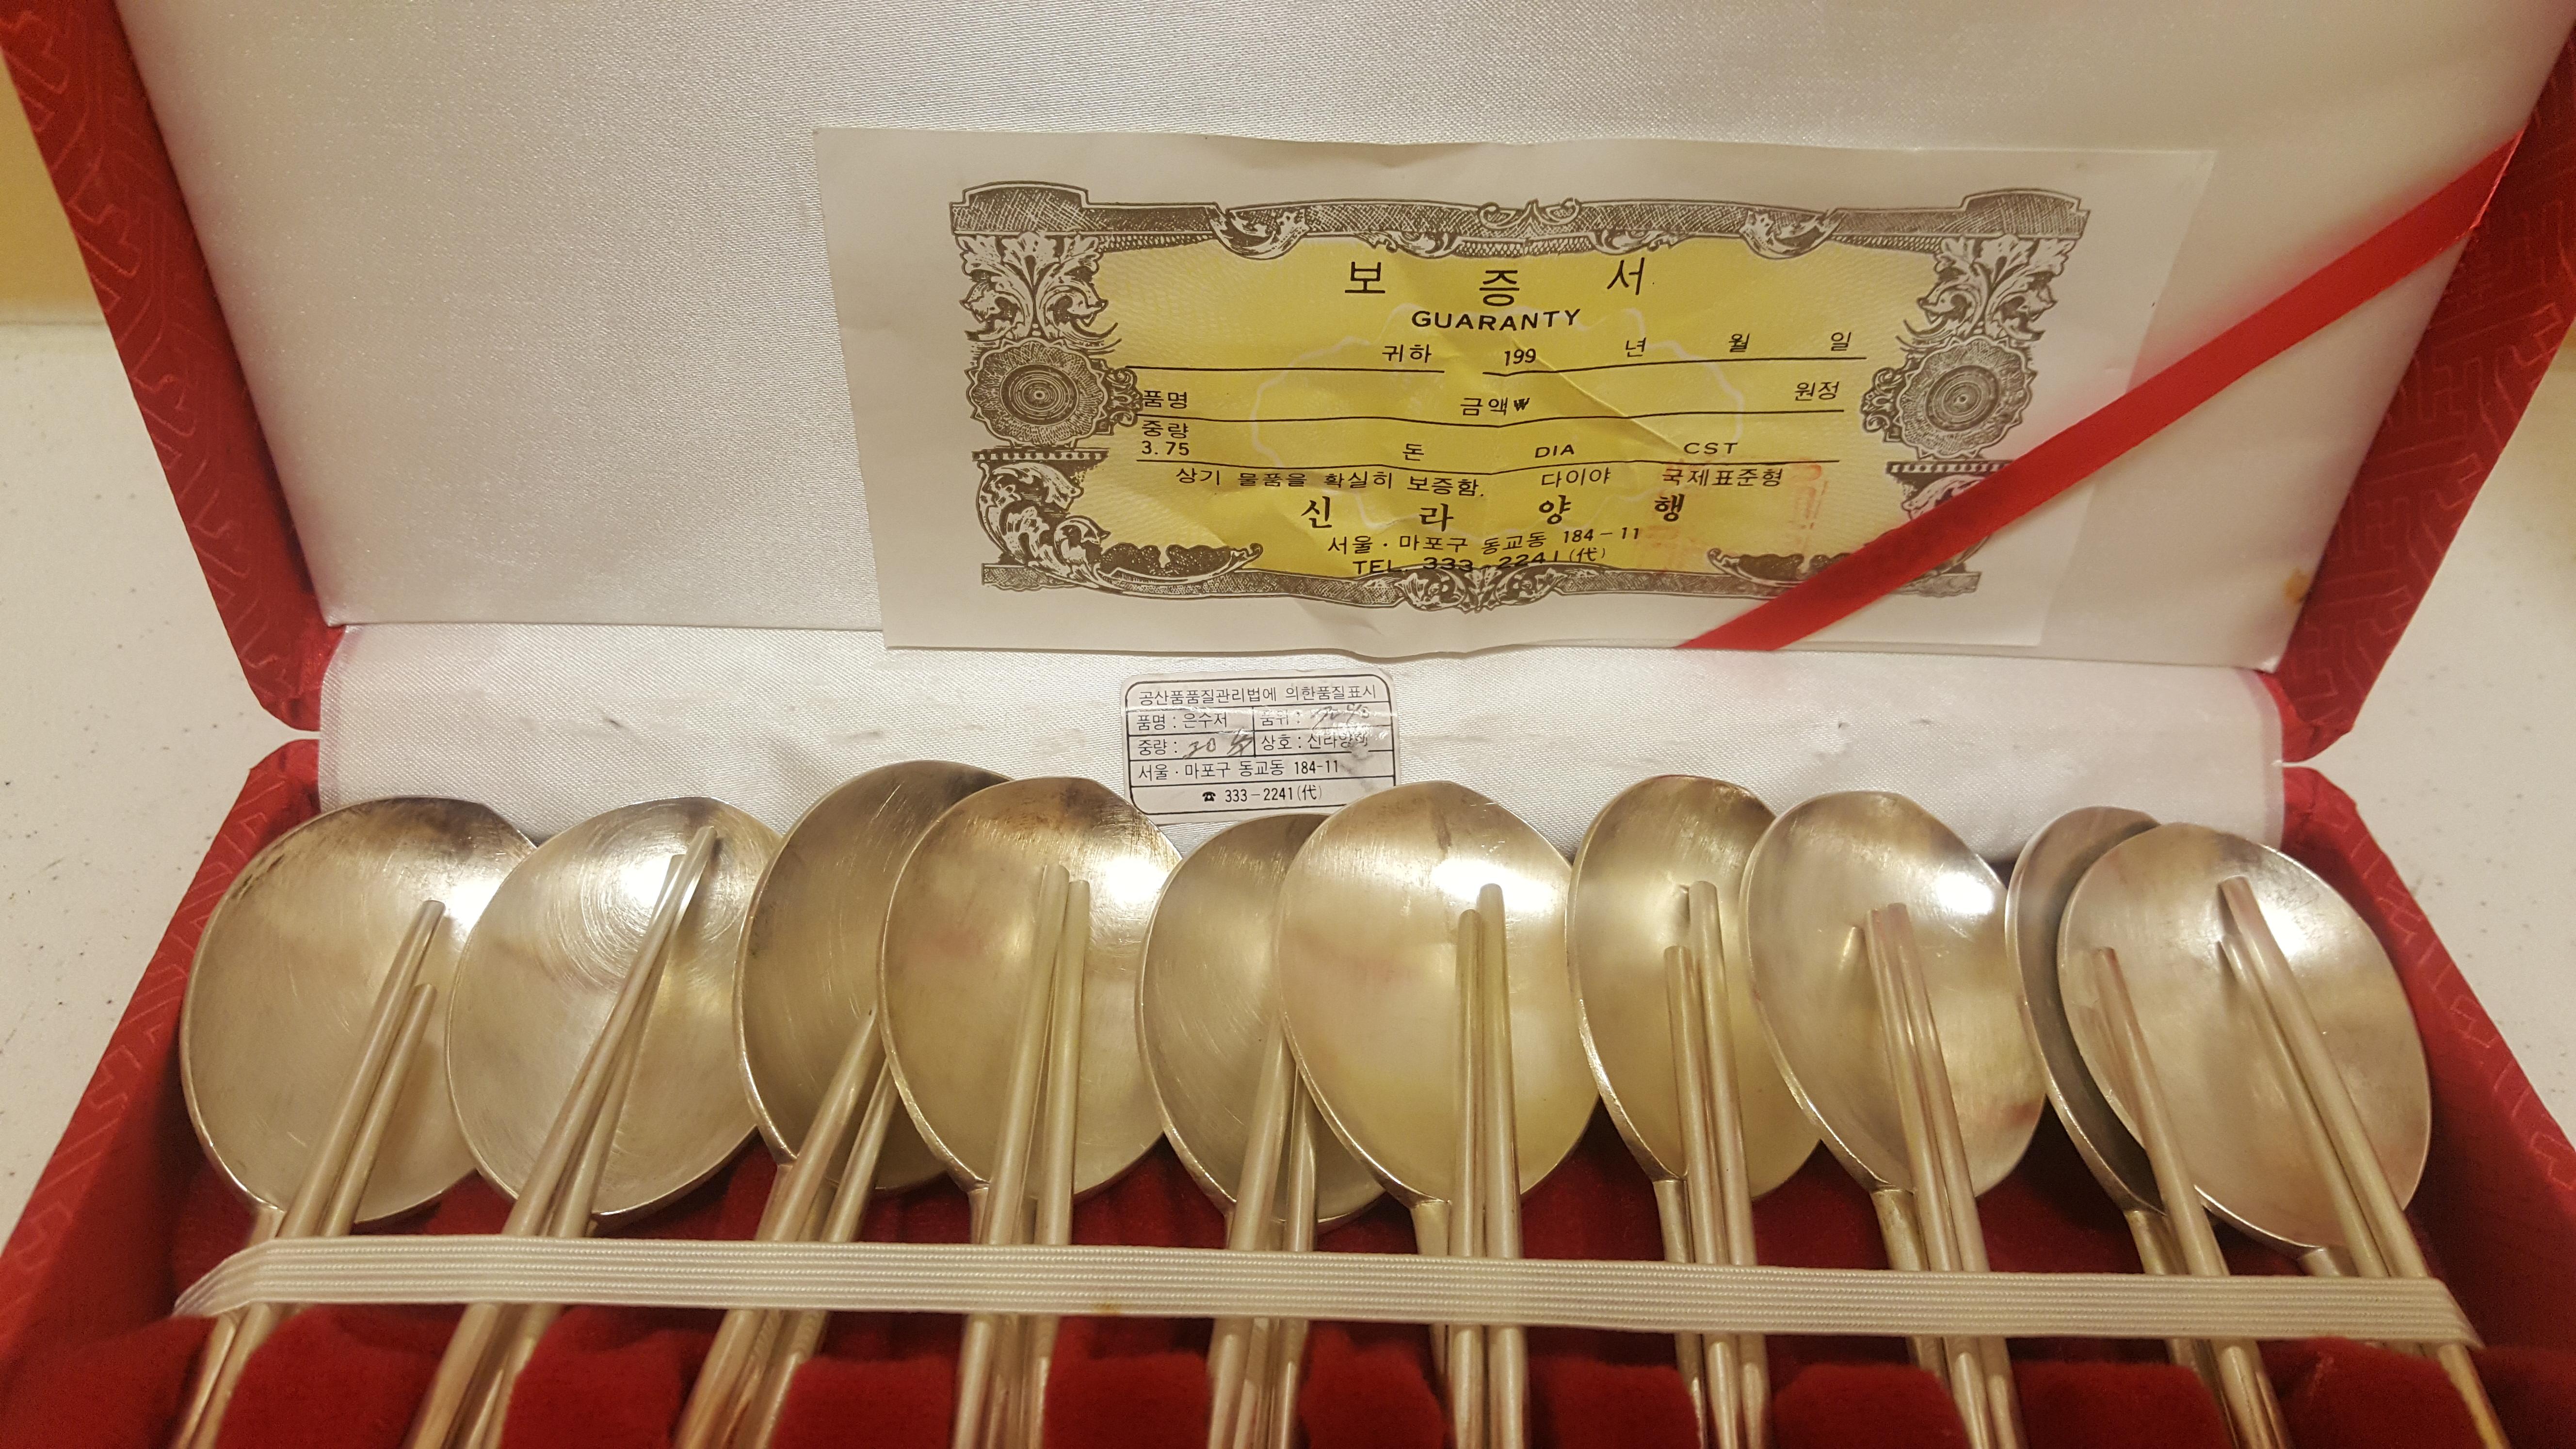 Asian Oriental 999 Silver Chopstick Spoon Set for 10 Blue Enamel Design, Original Box & Certificate 1122 Grams Total.  This set is traditional and pristine.